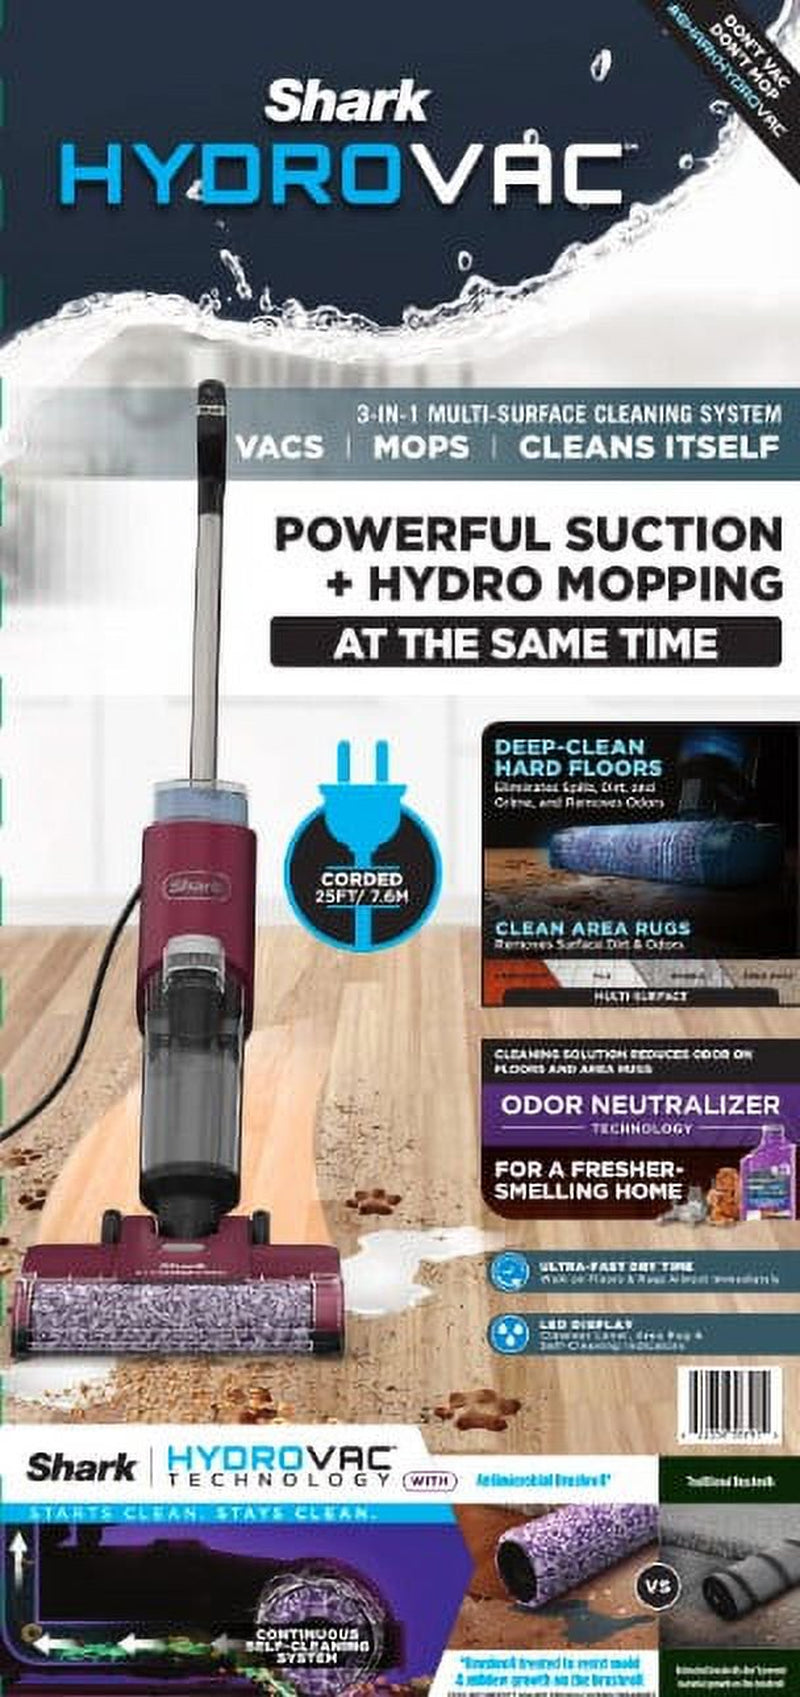 Hydrovac 3In1 Vacuum, Mop & Self-Cleaning Corded System, with Antimicrobial Brushroll* & Multi-Surface Cleaning Solution, Perfect for Hardwood, Tile, Marble, Laminate & Area Rugs, WD100